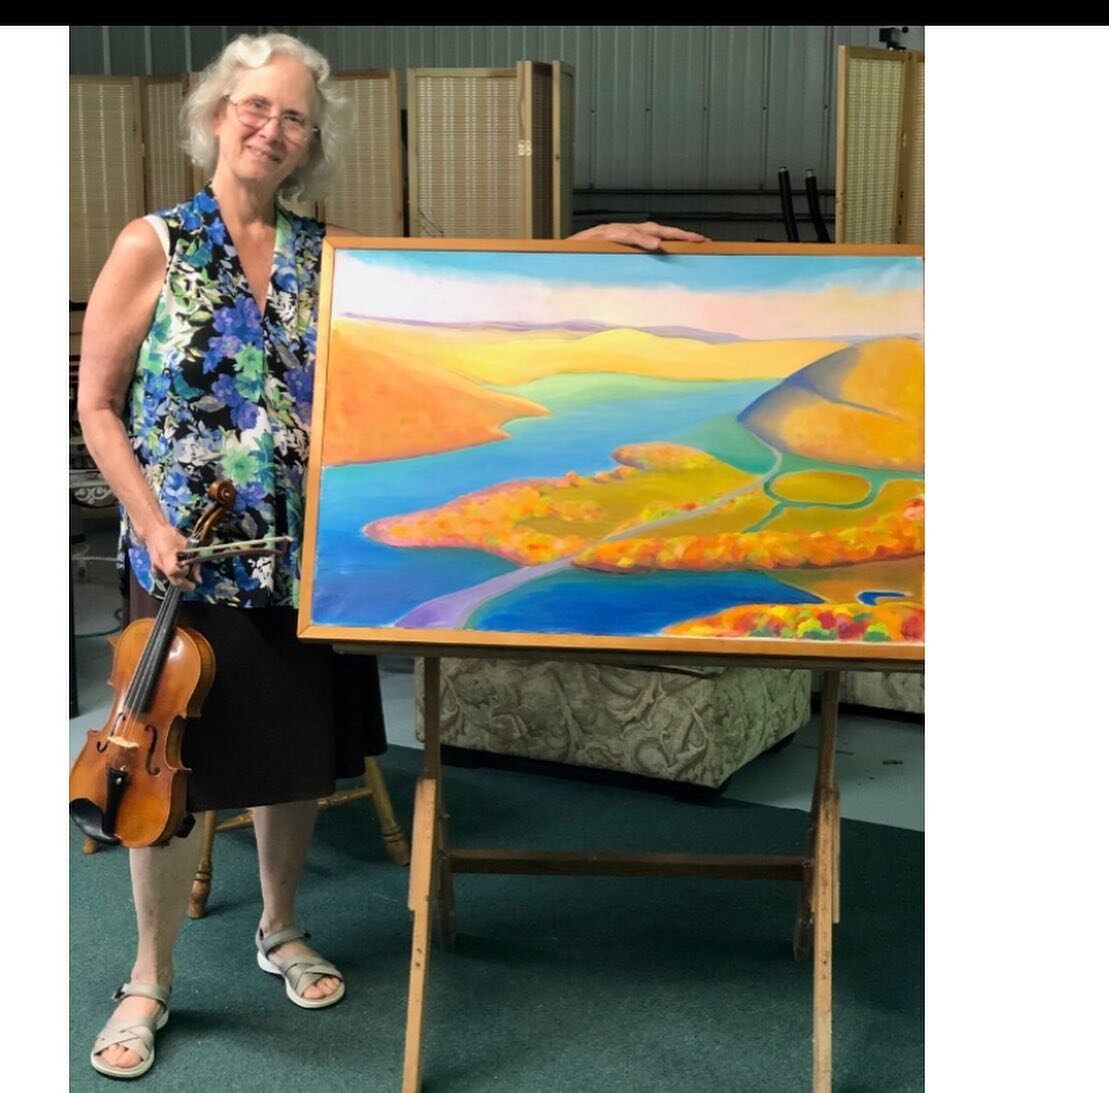 Meet Kit: A little of this and that, Kit @dodabbler1313 has her talented hands in both Performance and Visual arts! She&rsquo;s a music performer and teacher in Highland. And if that&rsquo;s not enough, she&rsquo;s busy making stained glass, glass on